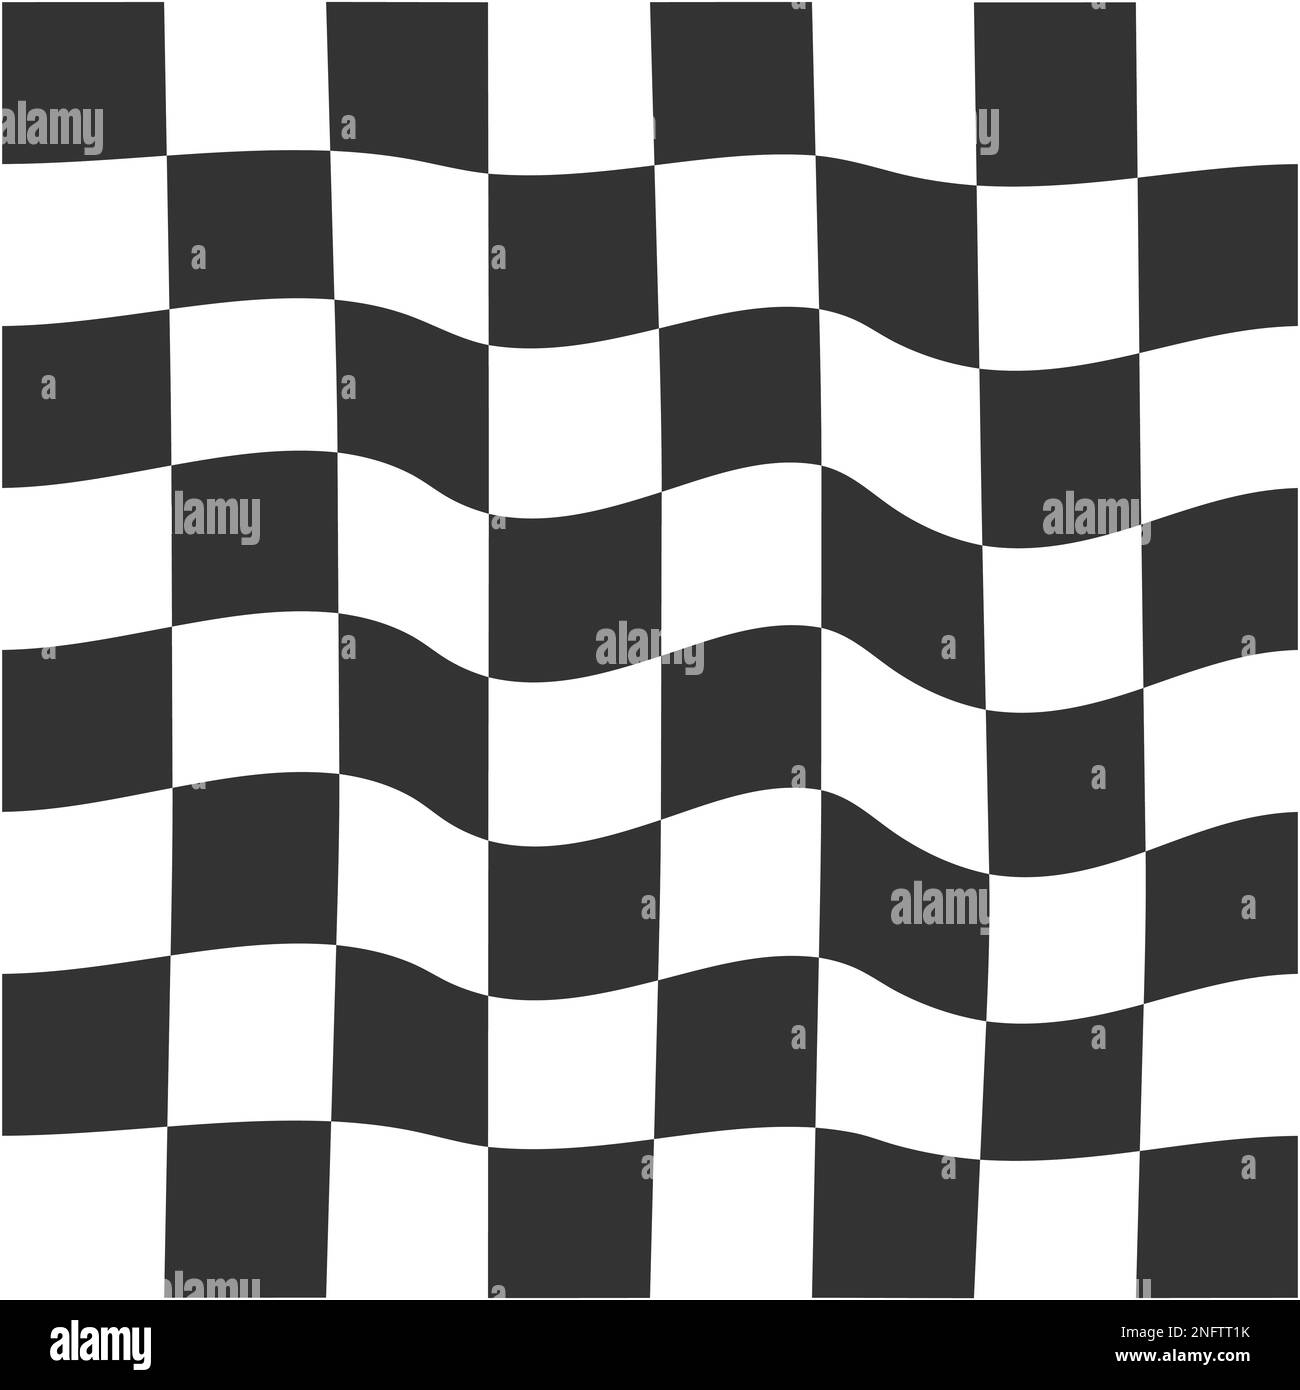 Distorted black and white chessboard texture. Chequered visuall illusion. Psychedelic pattern with warped squares. Trippy checkerboard background Stock Vector